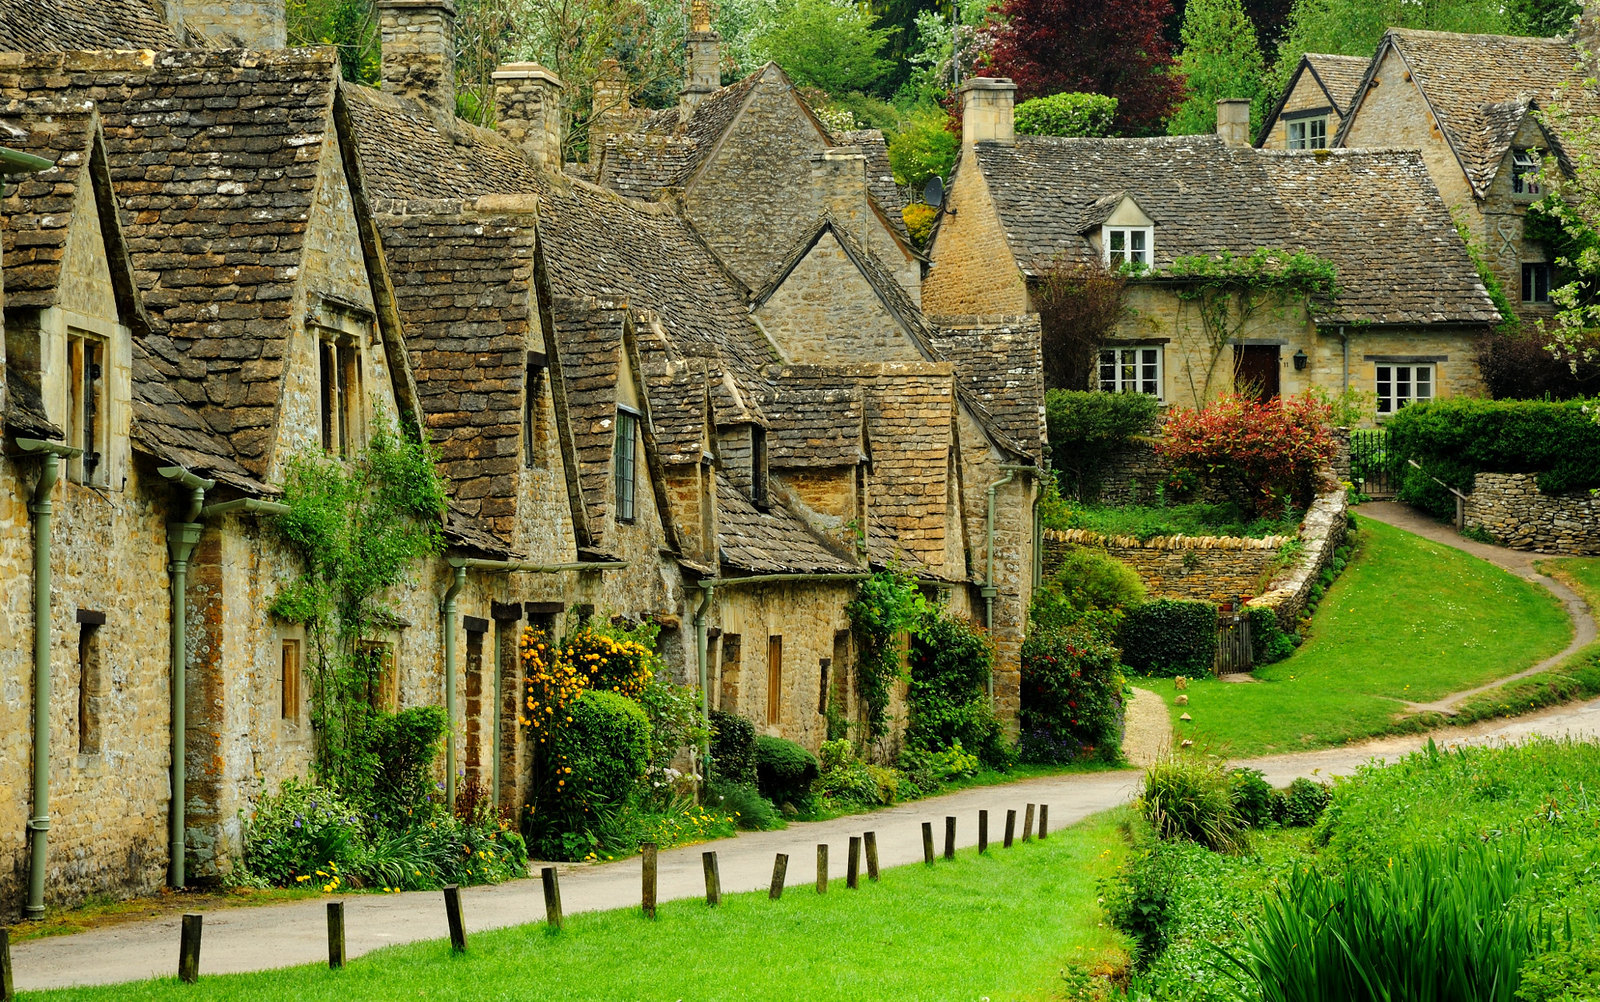 Arlington Row in Bibury, Gloucestershire was built in 1380 as a monastic wool store. The buildings were converted into weavers' cottages in the 17th century